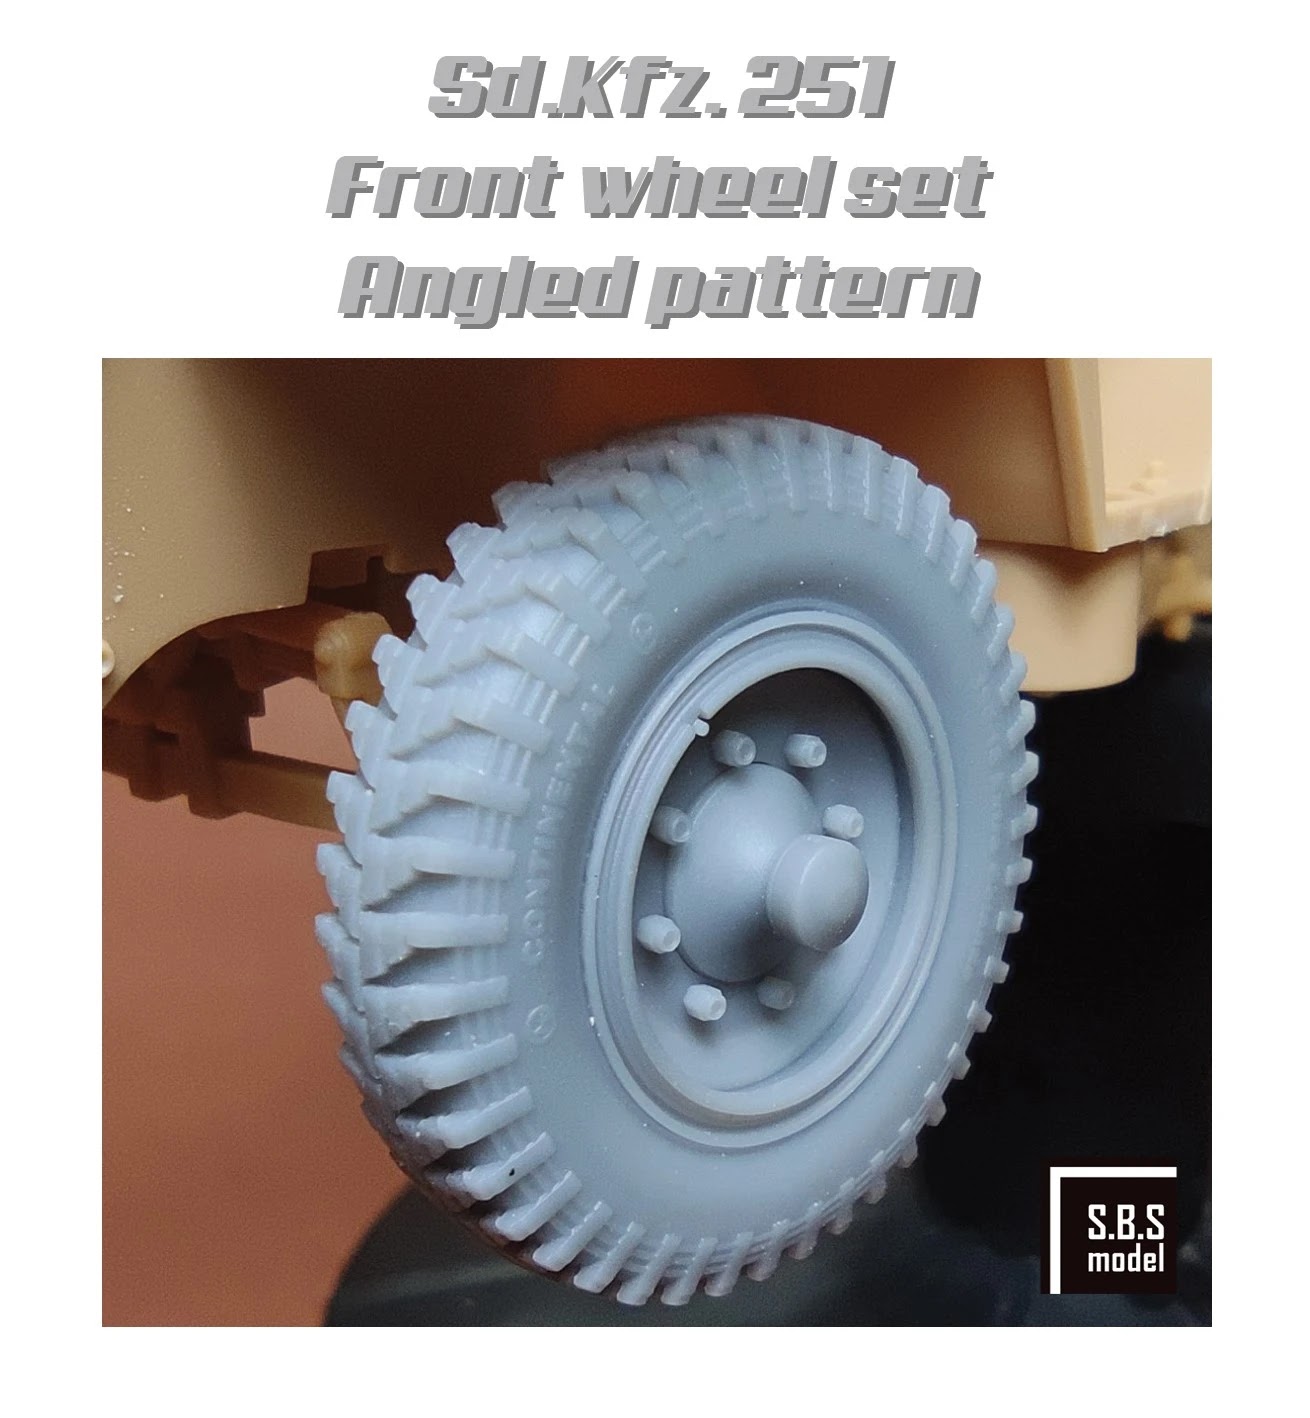 Sd.Kfz 251 entrance wheel eager (angled trend - sagged)